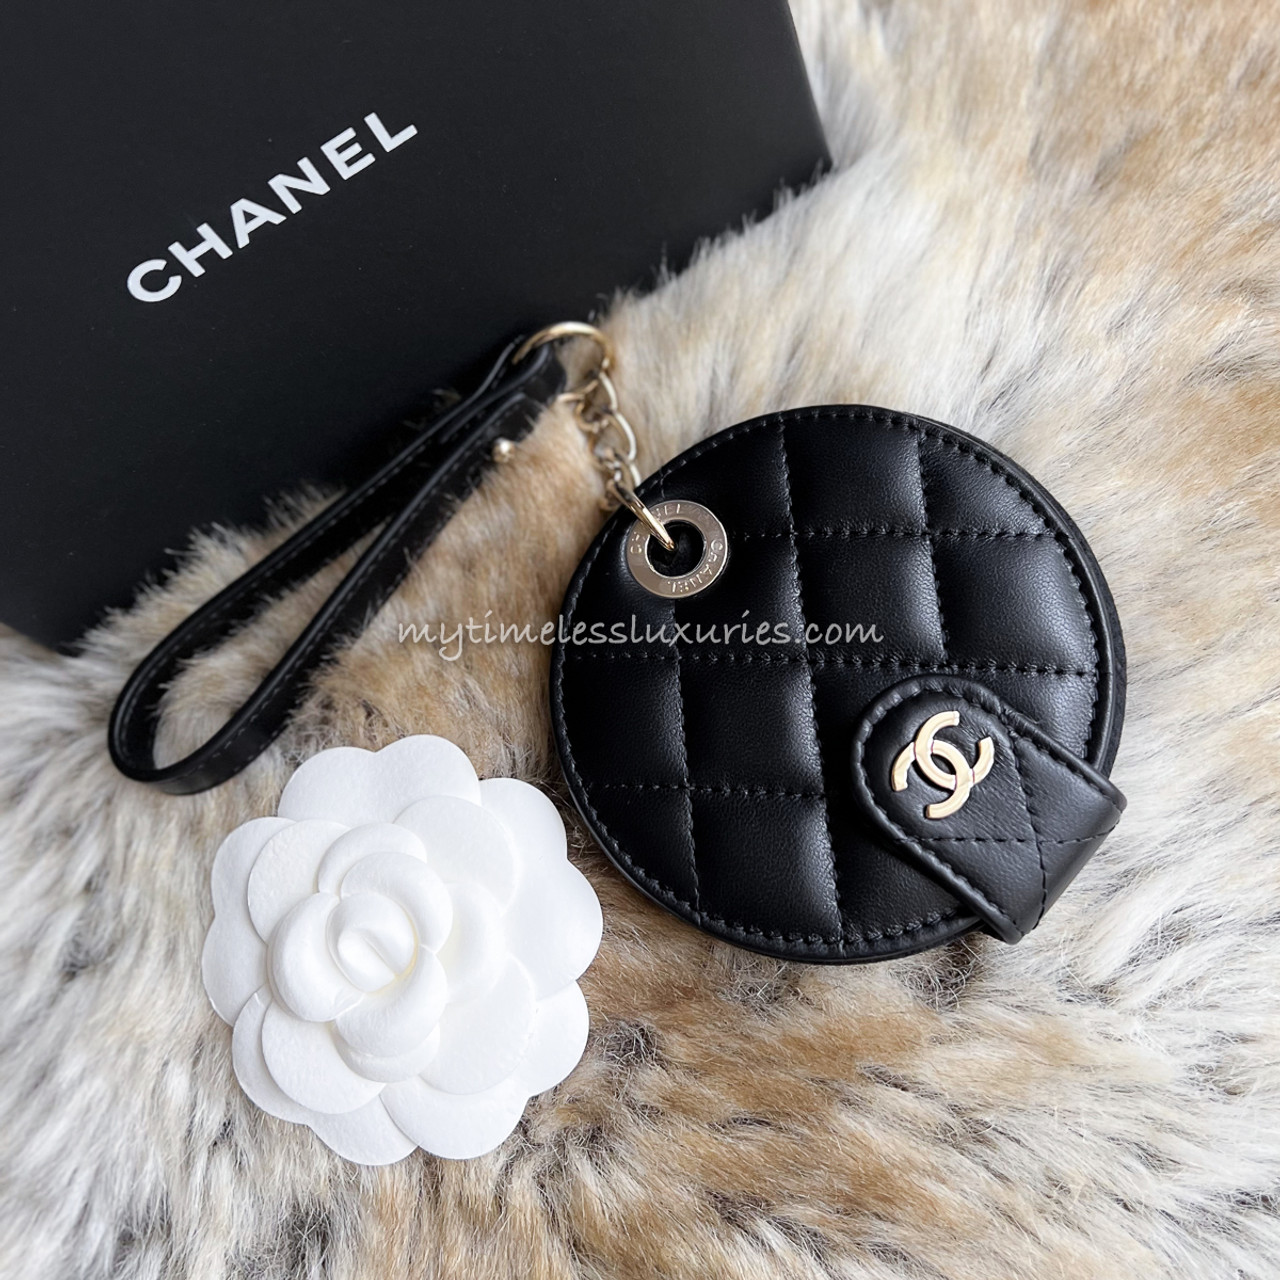 CHANEL VVIP Exclusive Bag/ Luggage Tag *New